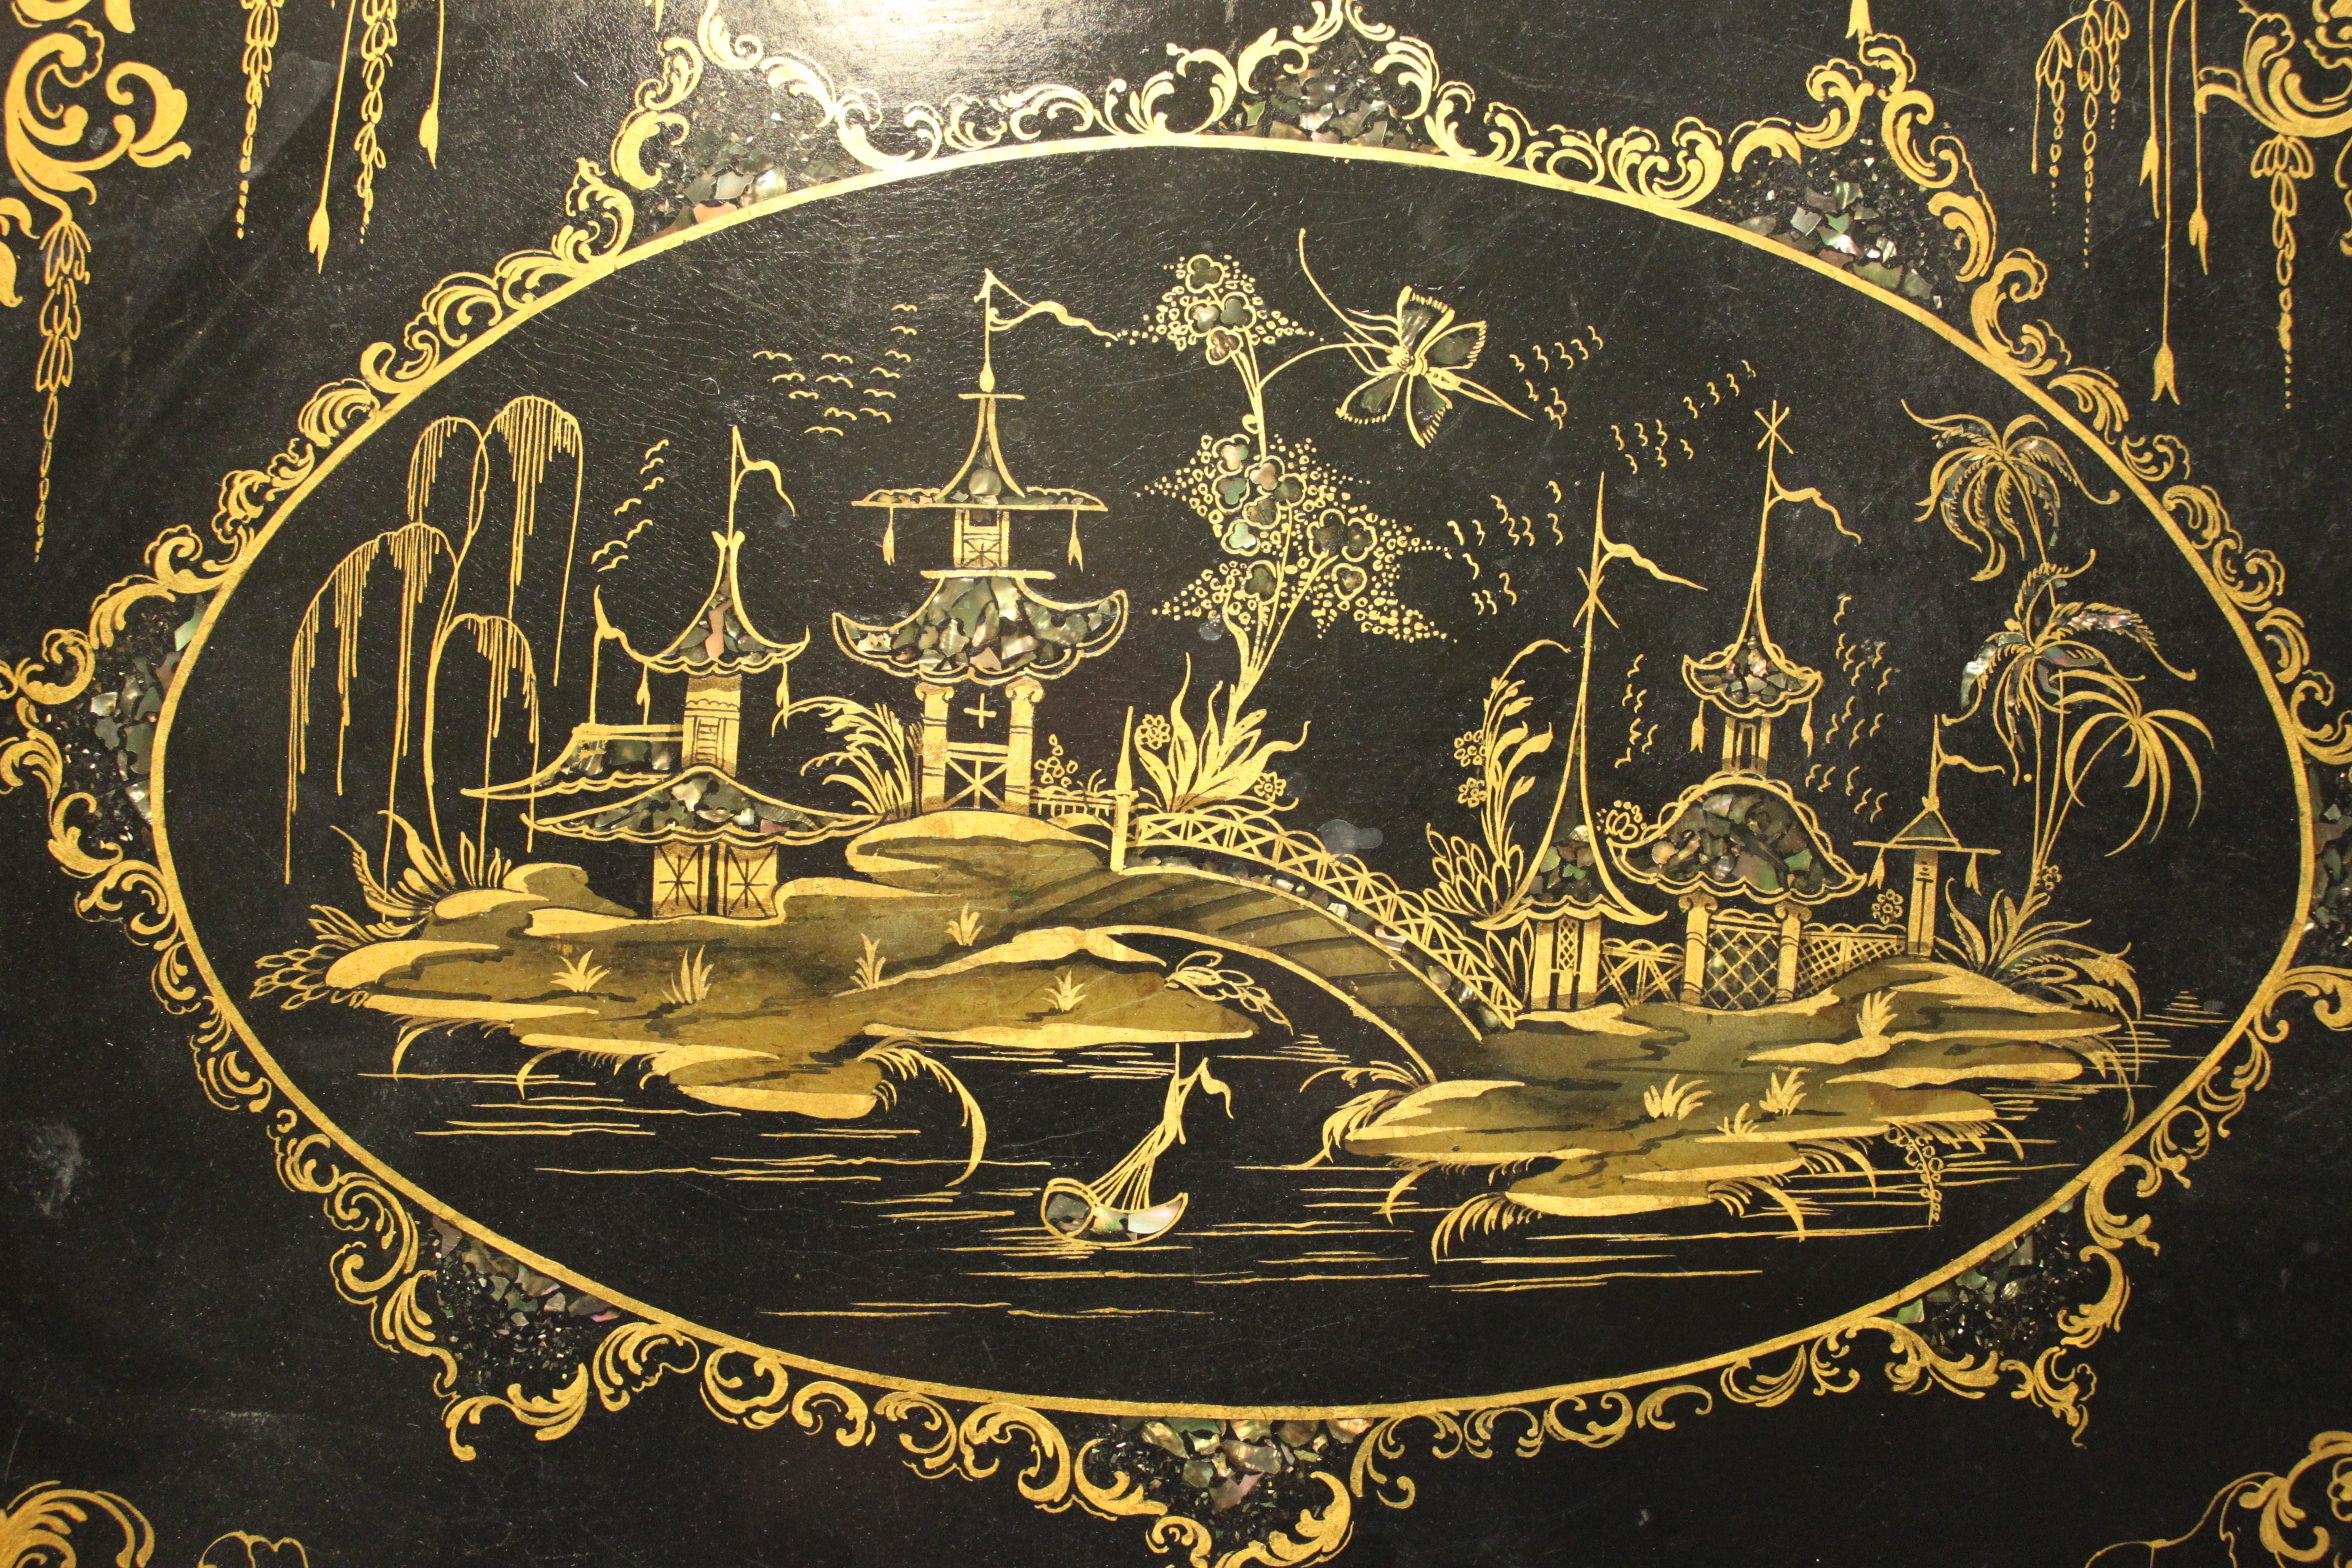 This very decorative and striking Queen gothic papier mache tray is decorated with inlaid abalone shell and a fantastic gilt chinoiserie scene to the central cartouche which itself is surrounded by C-scrolls, stylised flowers and pendant foliage. It